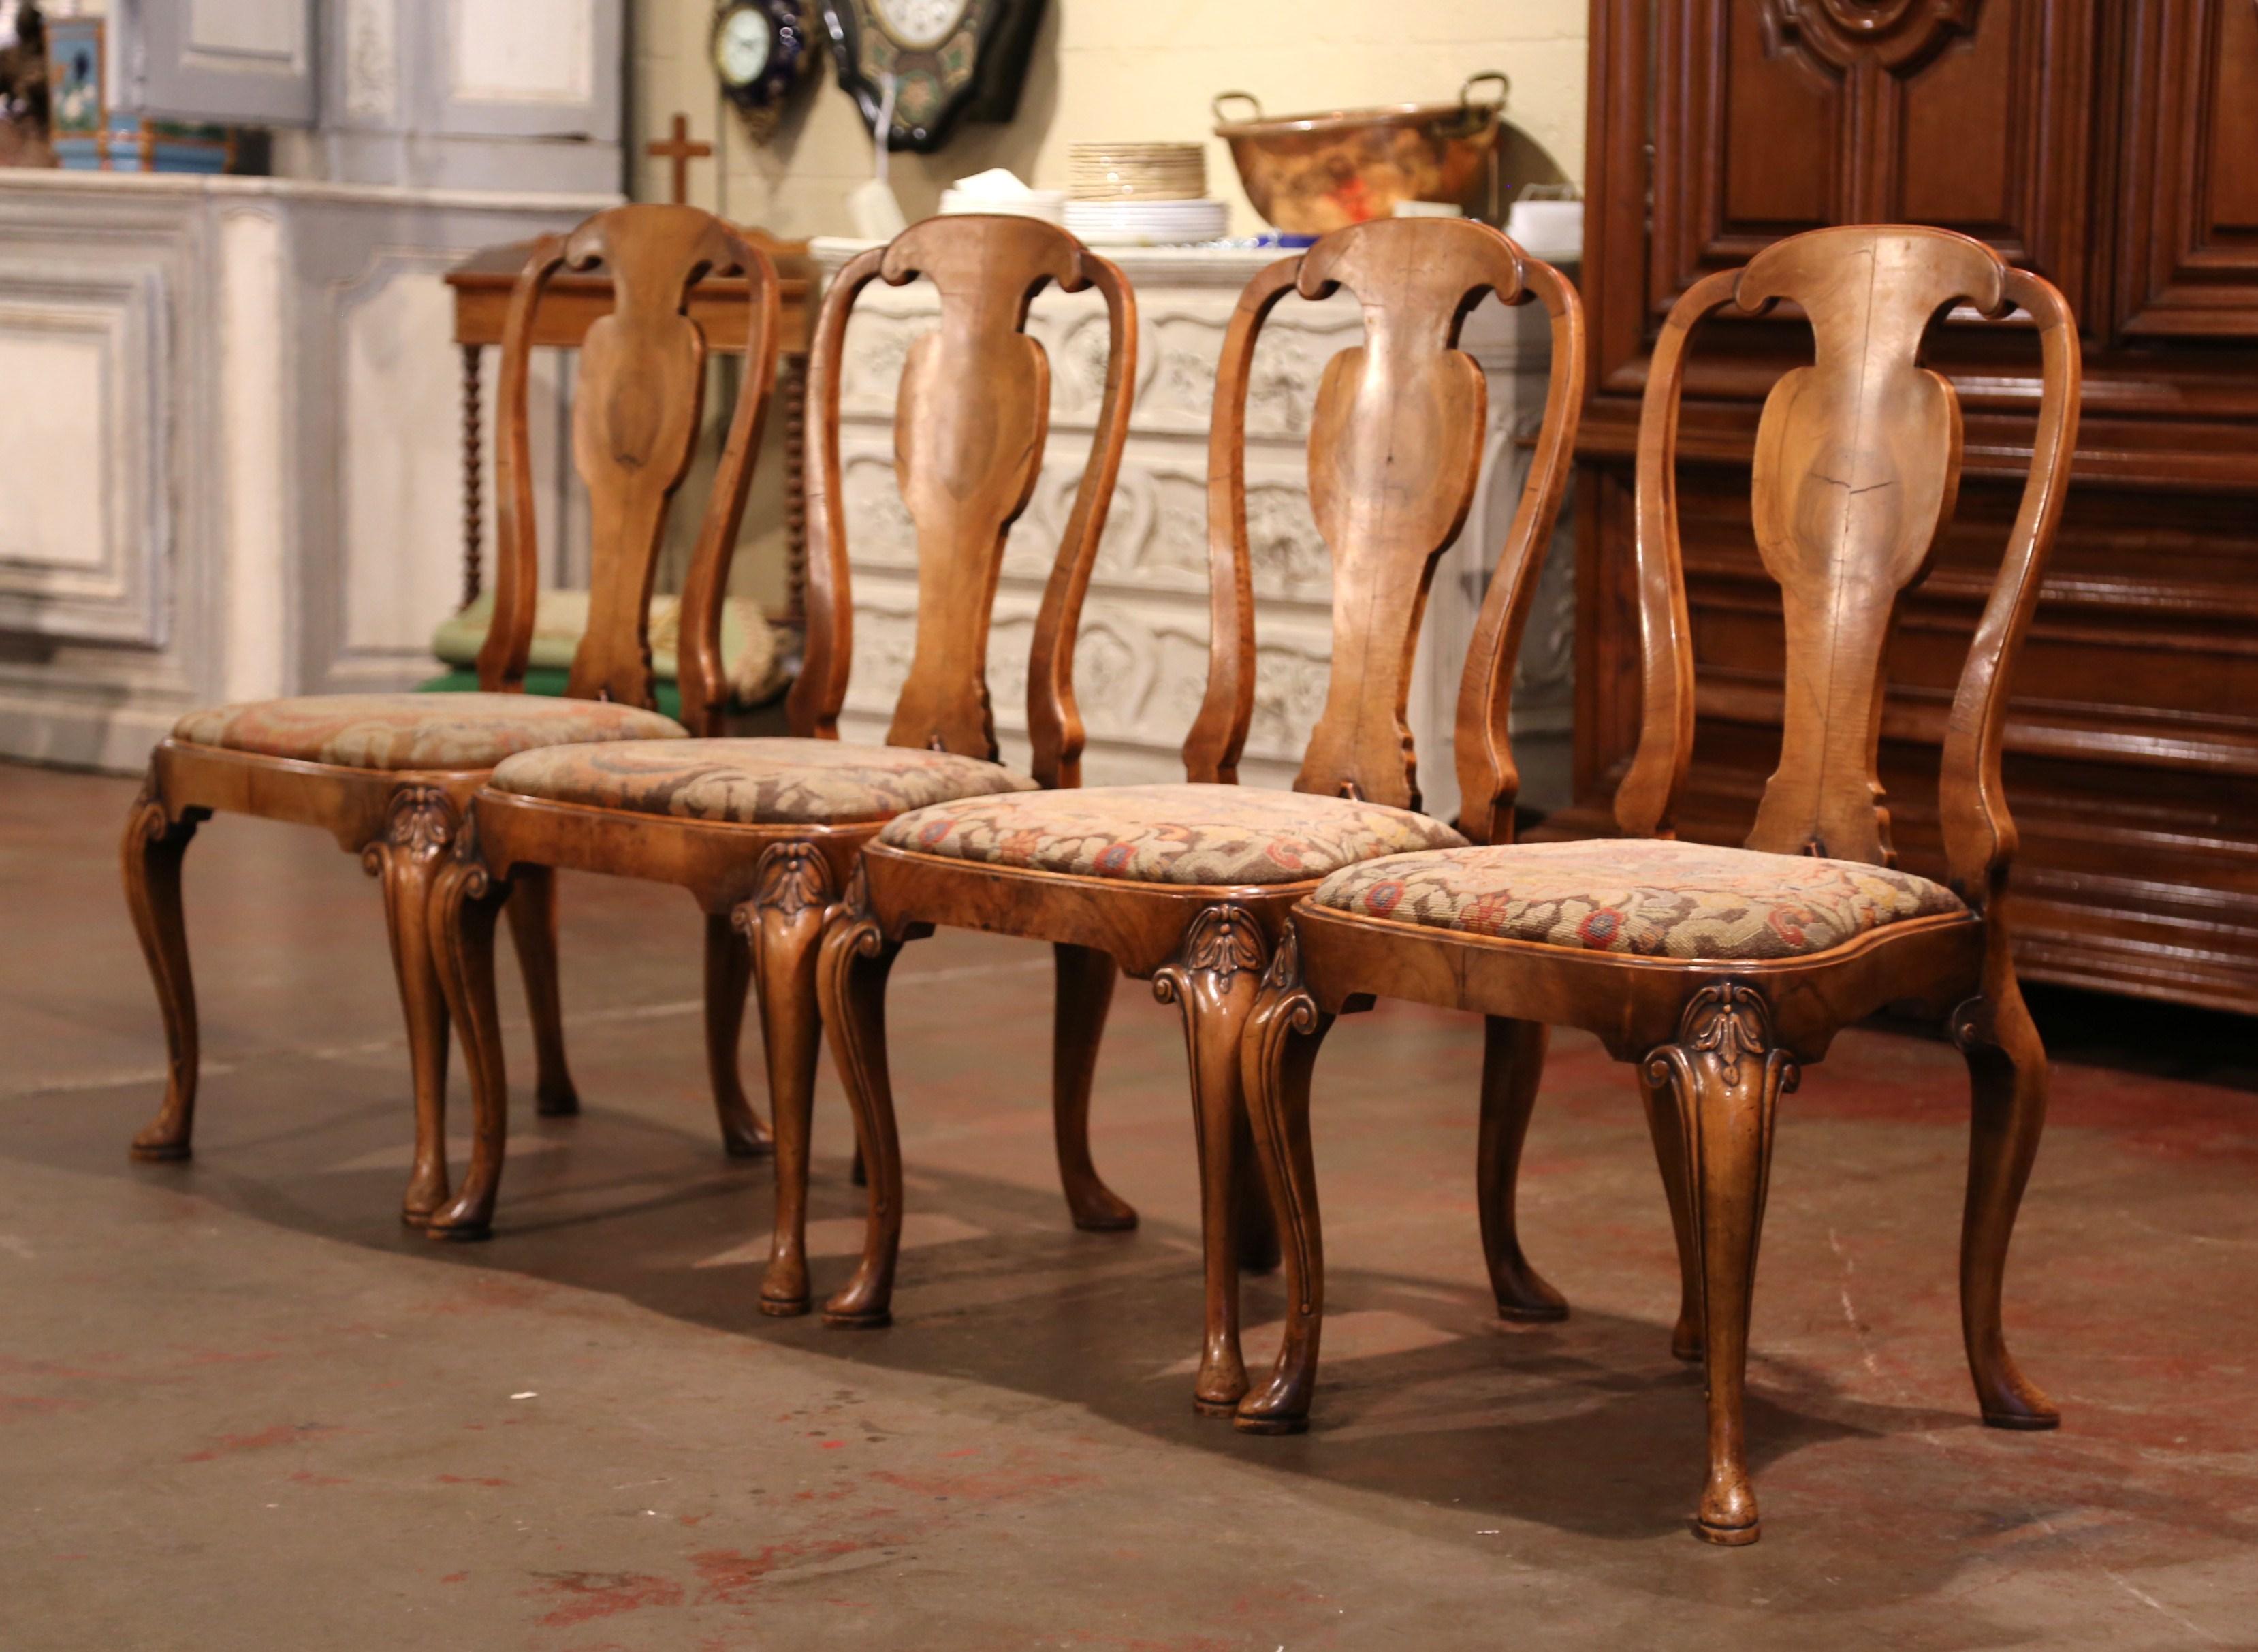 Decorate a game table or breakfast room with this elegant set of antique chairs; crafted in England circa 1880, each chair stands on cabriole legs decorated with leaf motifs at the shoulder. The seats are upholstered with handwoven needlepoint